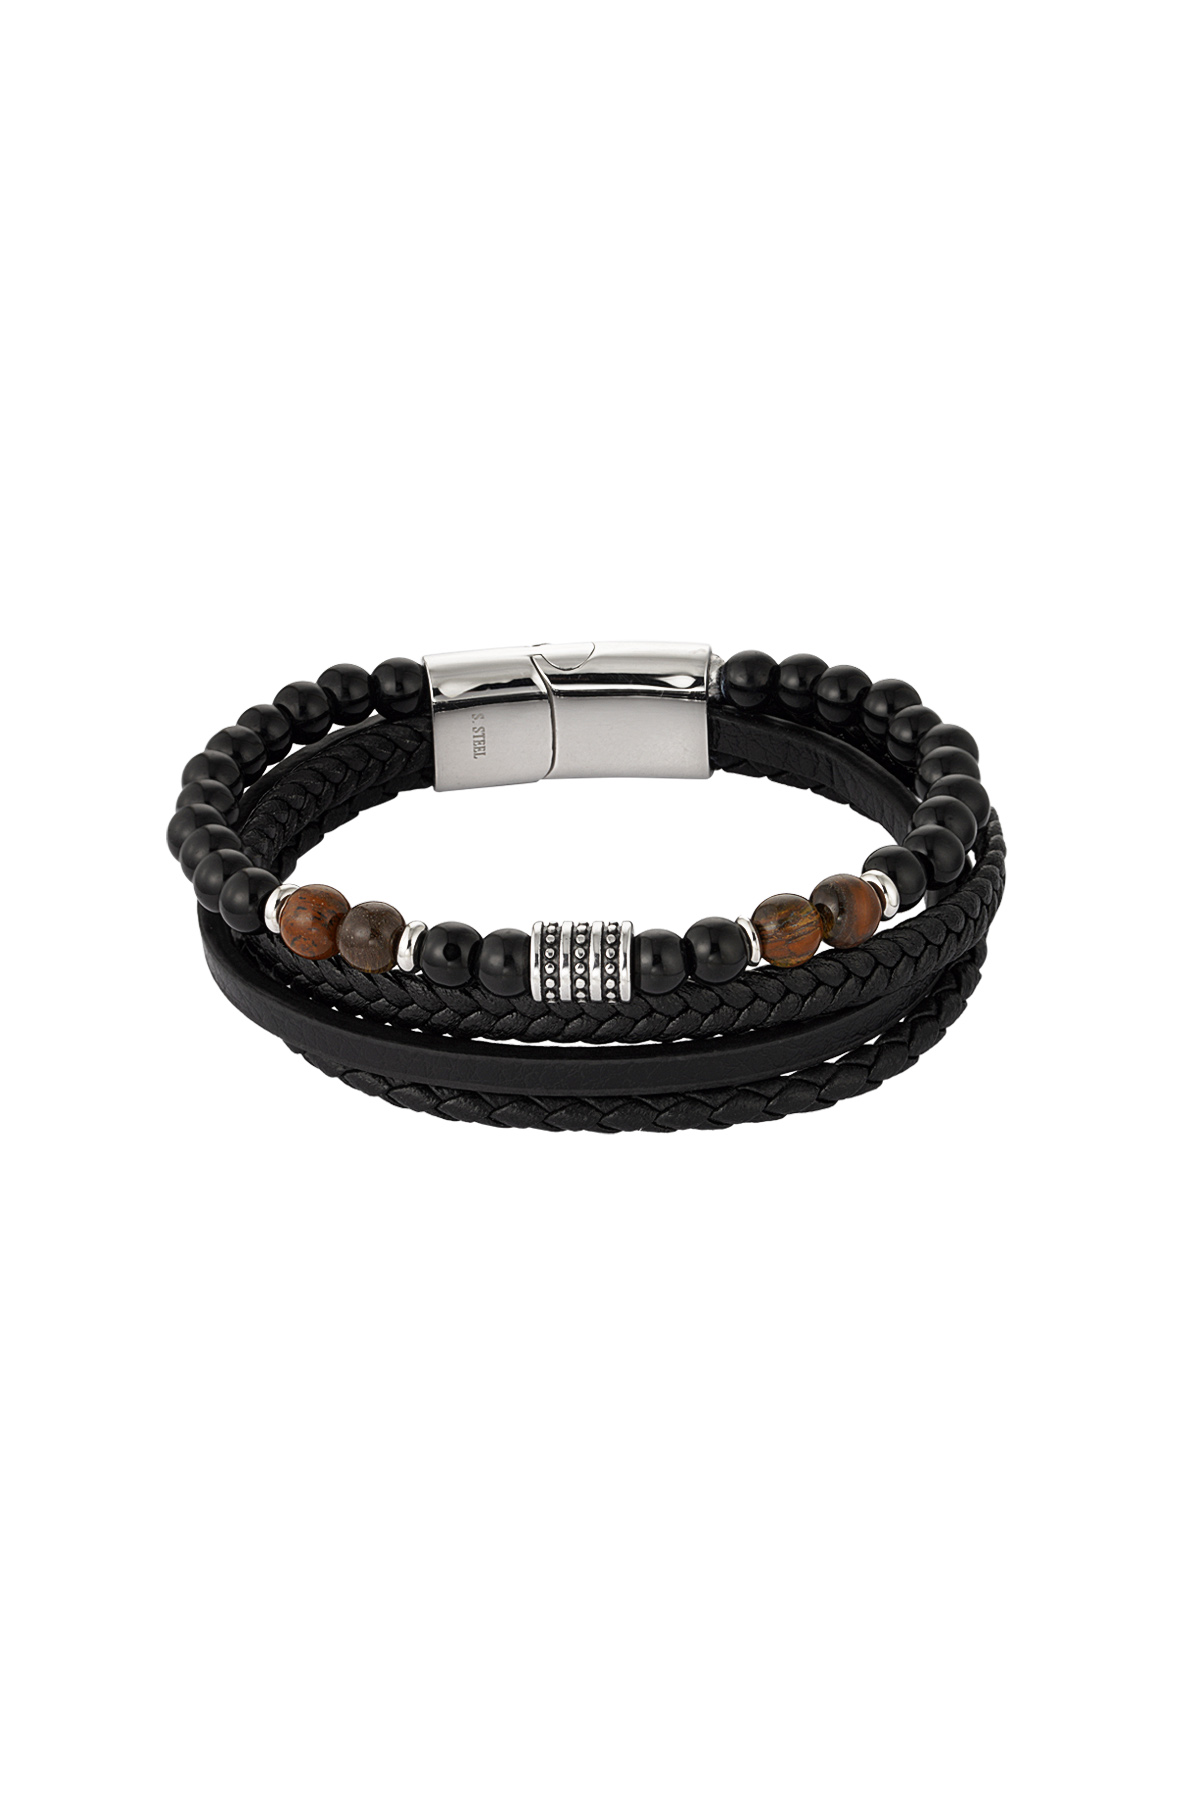 Men's bracelet double braided with beads - brown/black